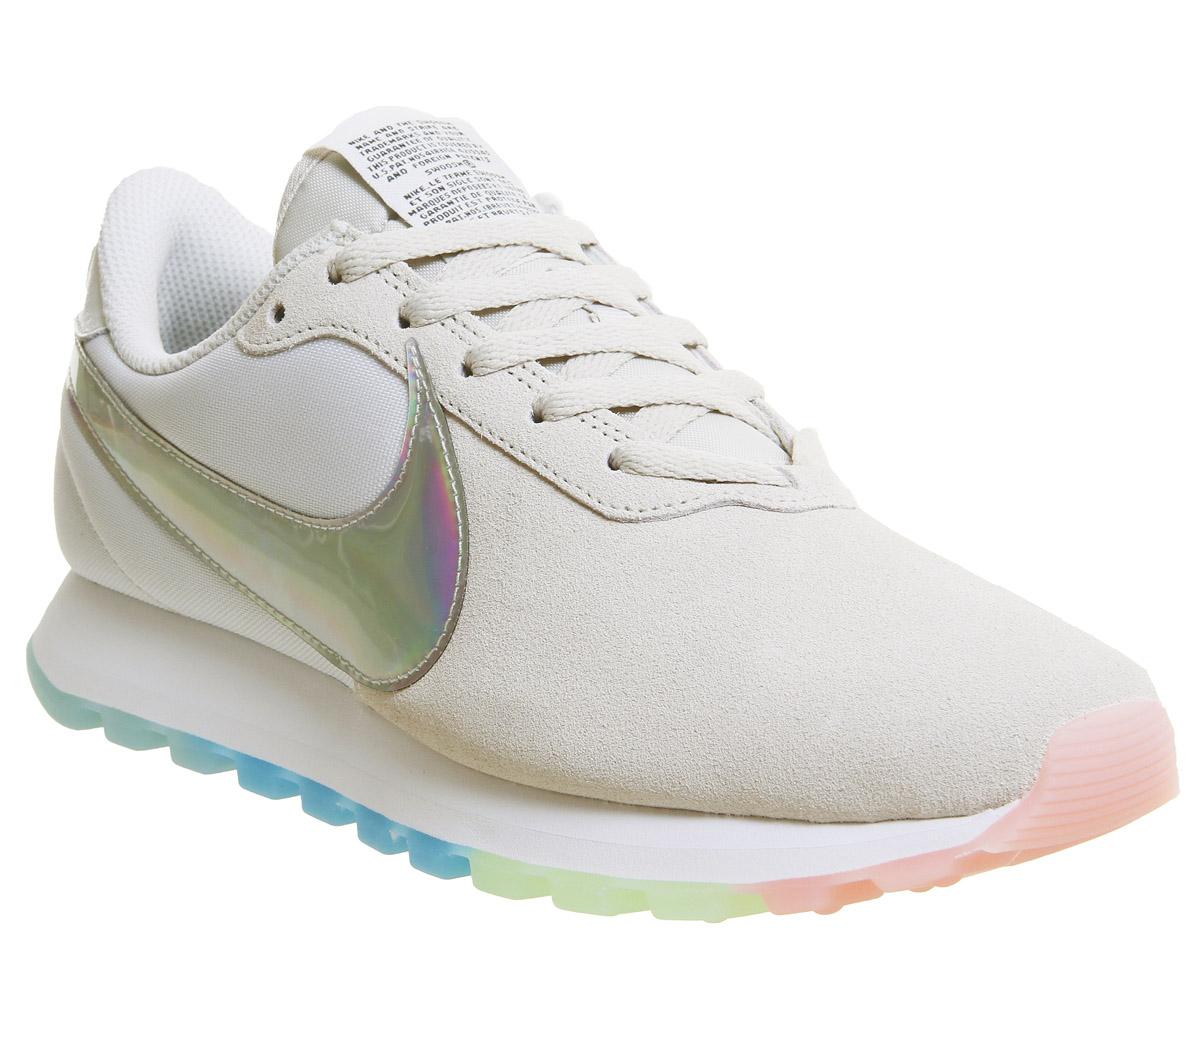 Nike Pre Love Ox Summit White Irridescent - Hers trainers